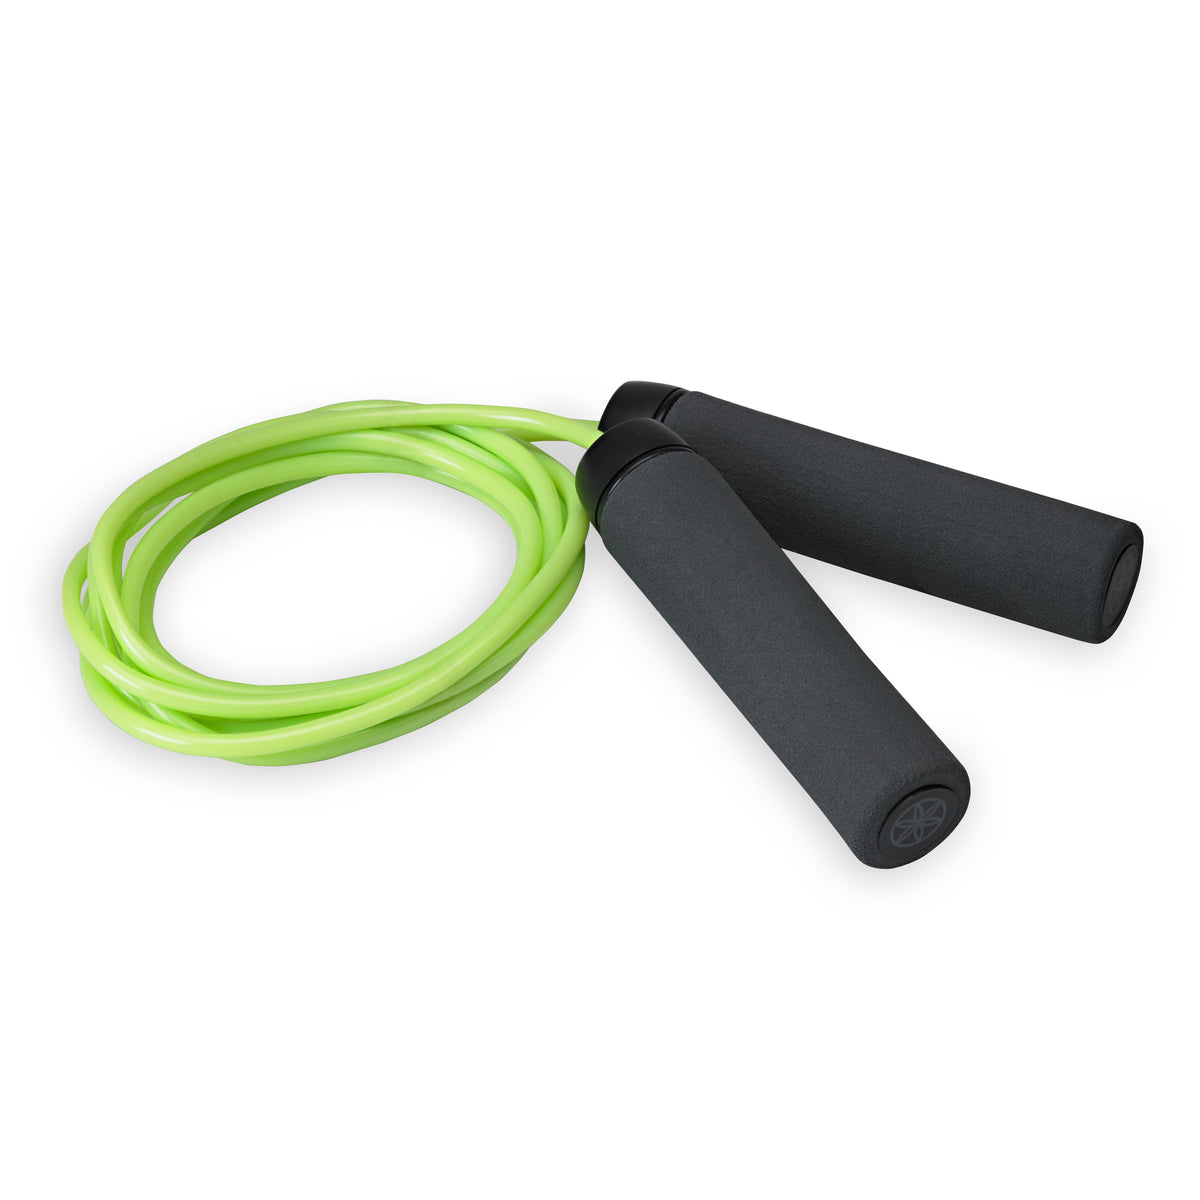 Gaiam Adjustable Speed Rope rolled up